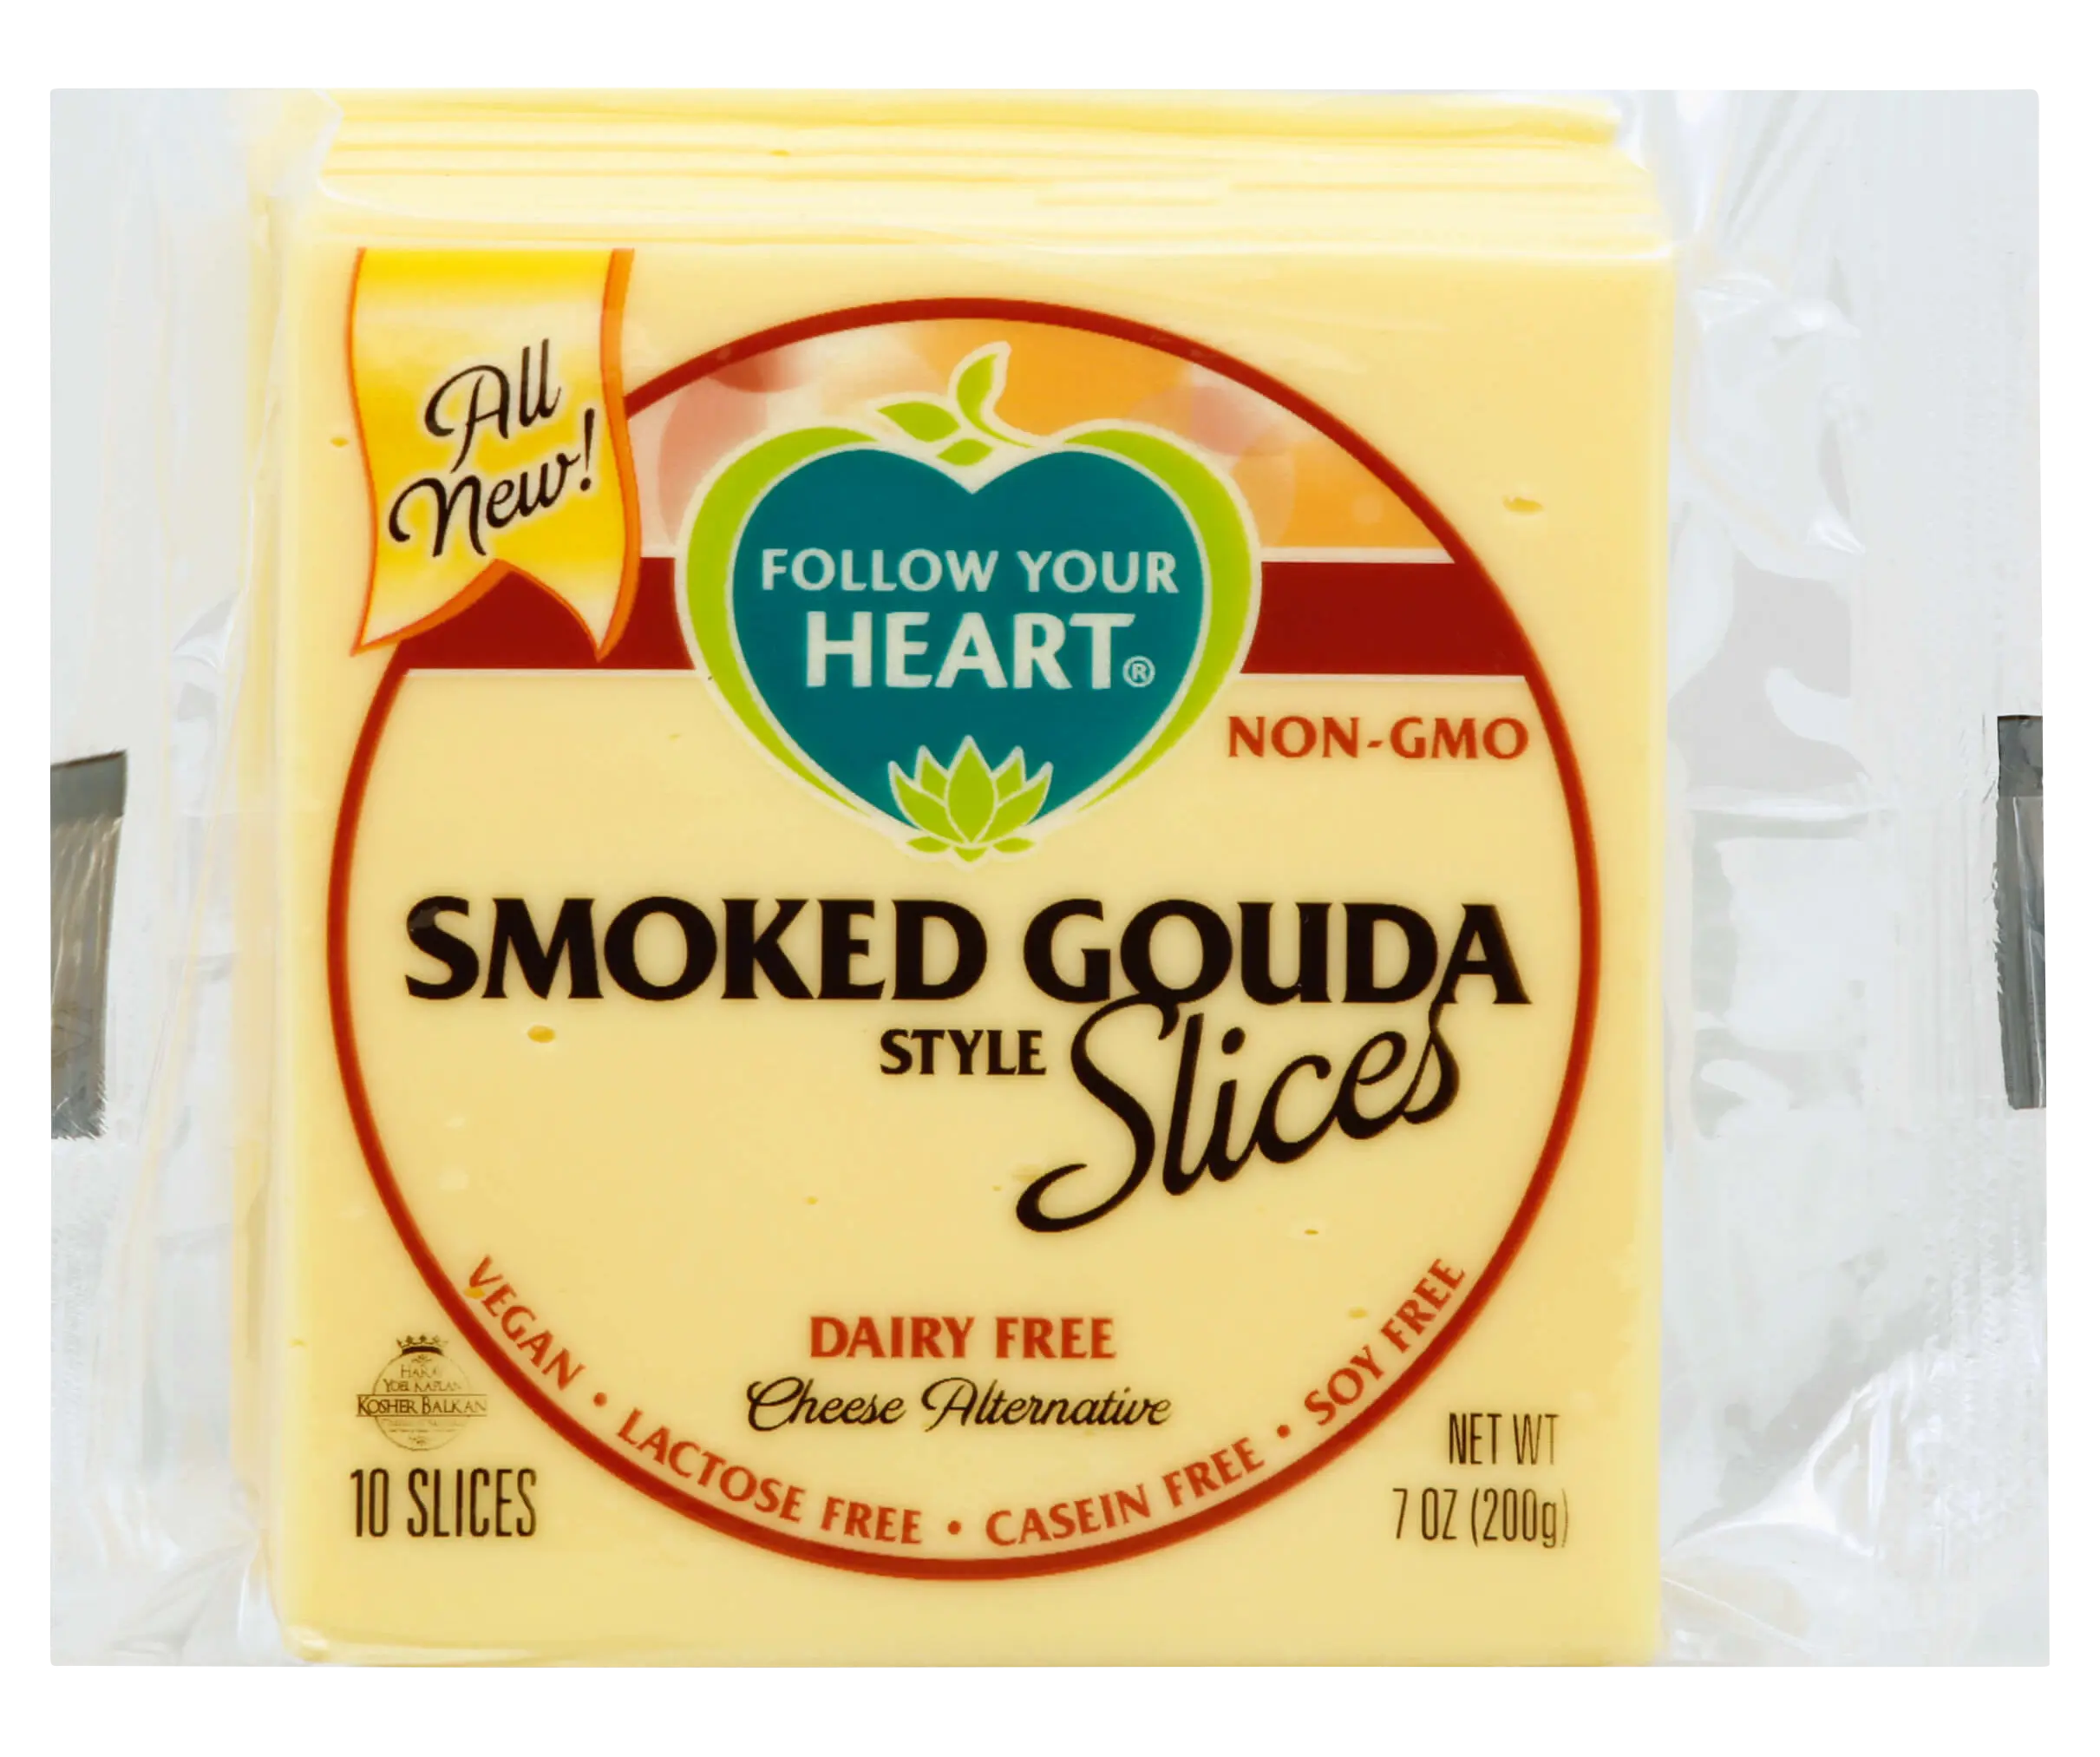 follow your heart smoked gouda vegan cheese - What happened to follow your heart